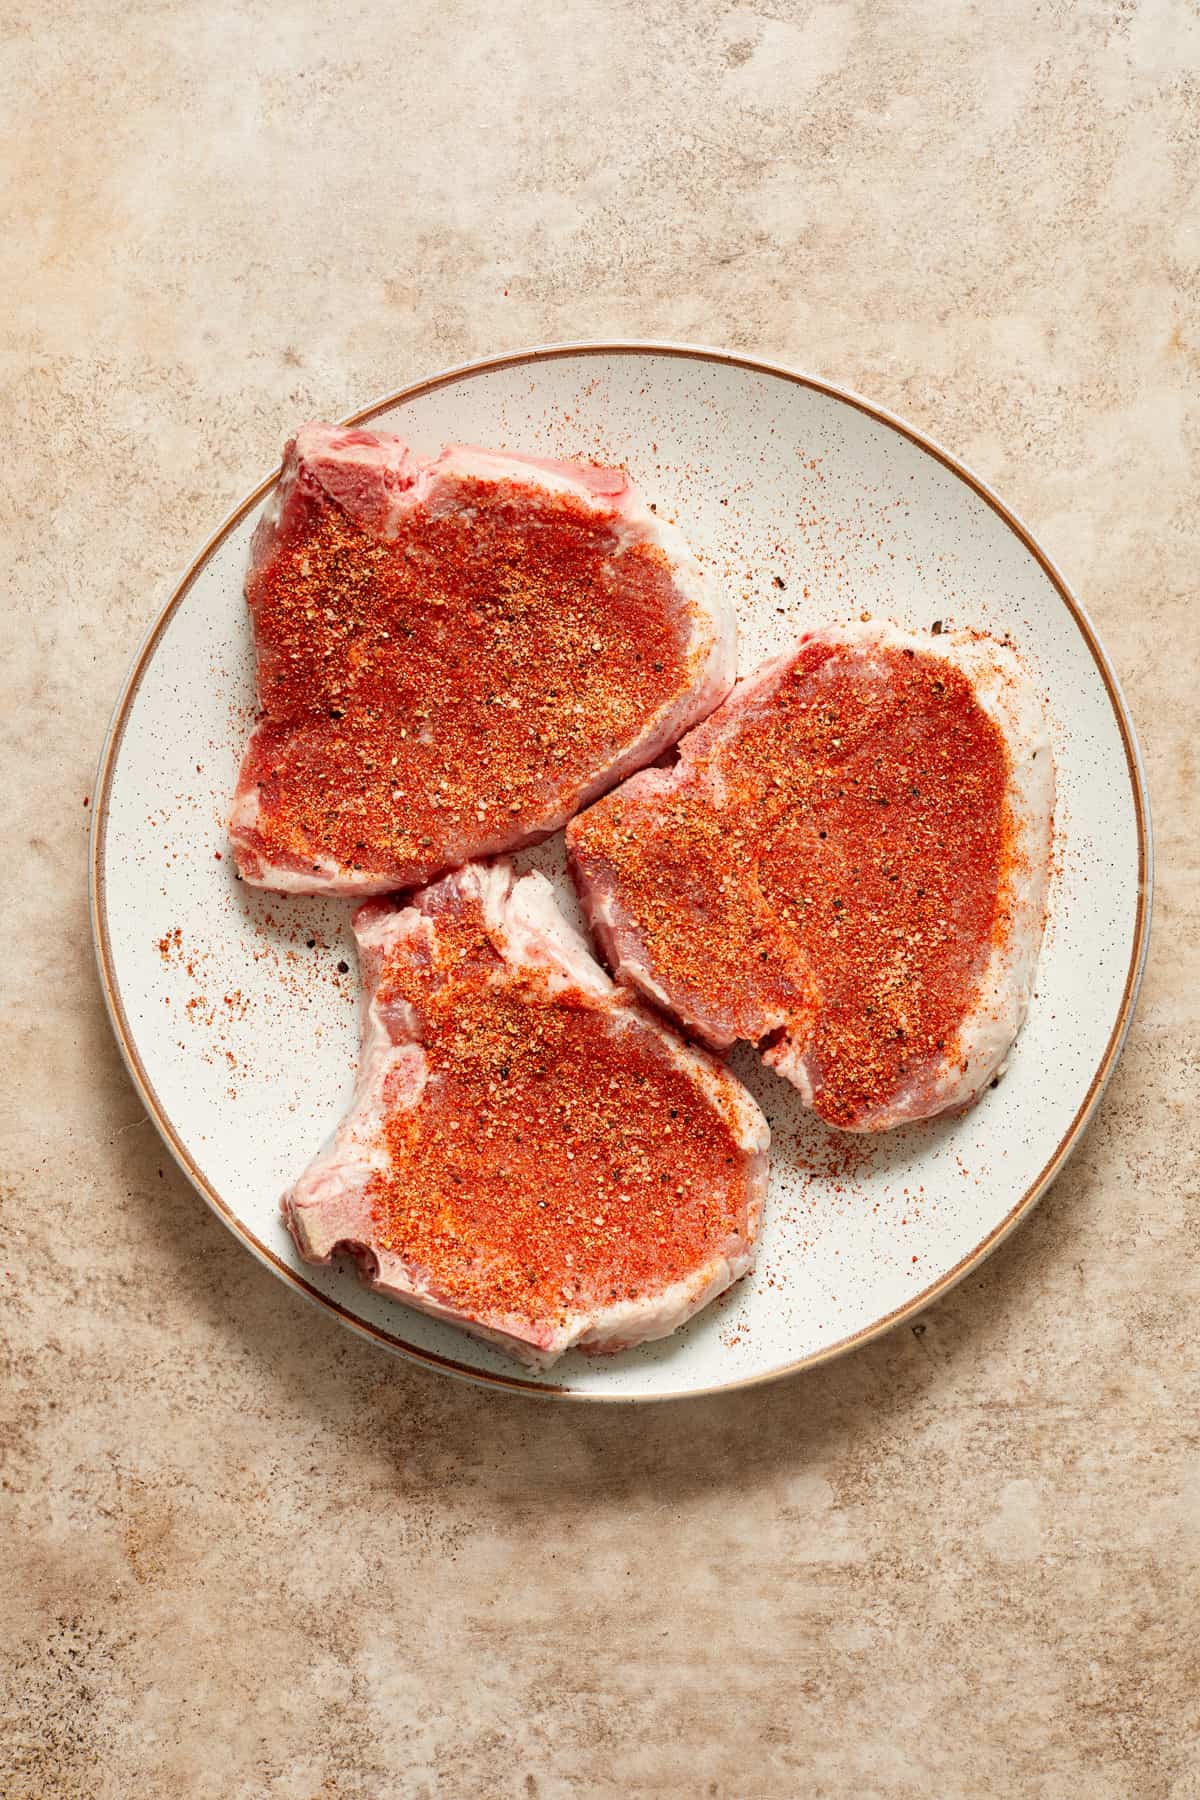 Pork chops with seasoning on white plate.